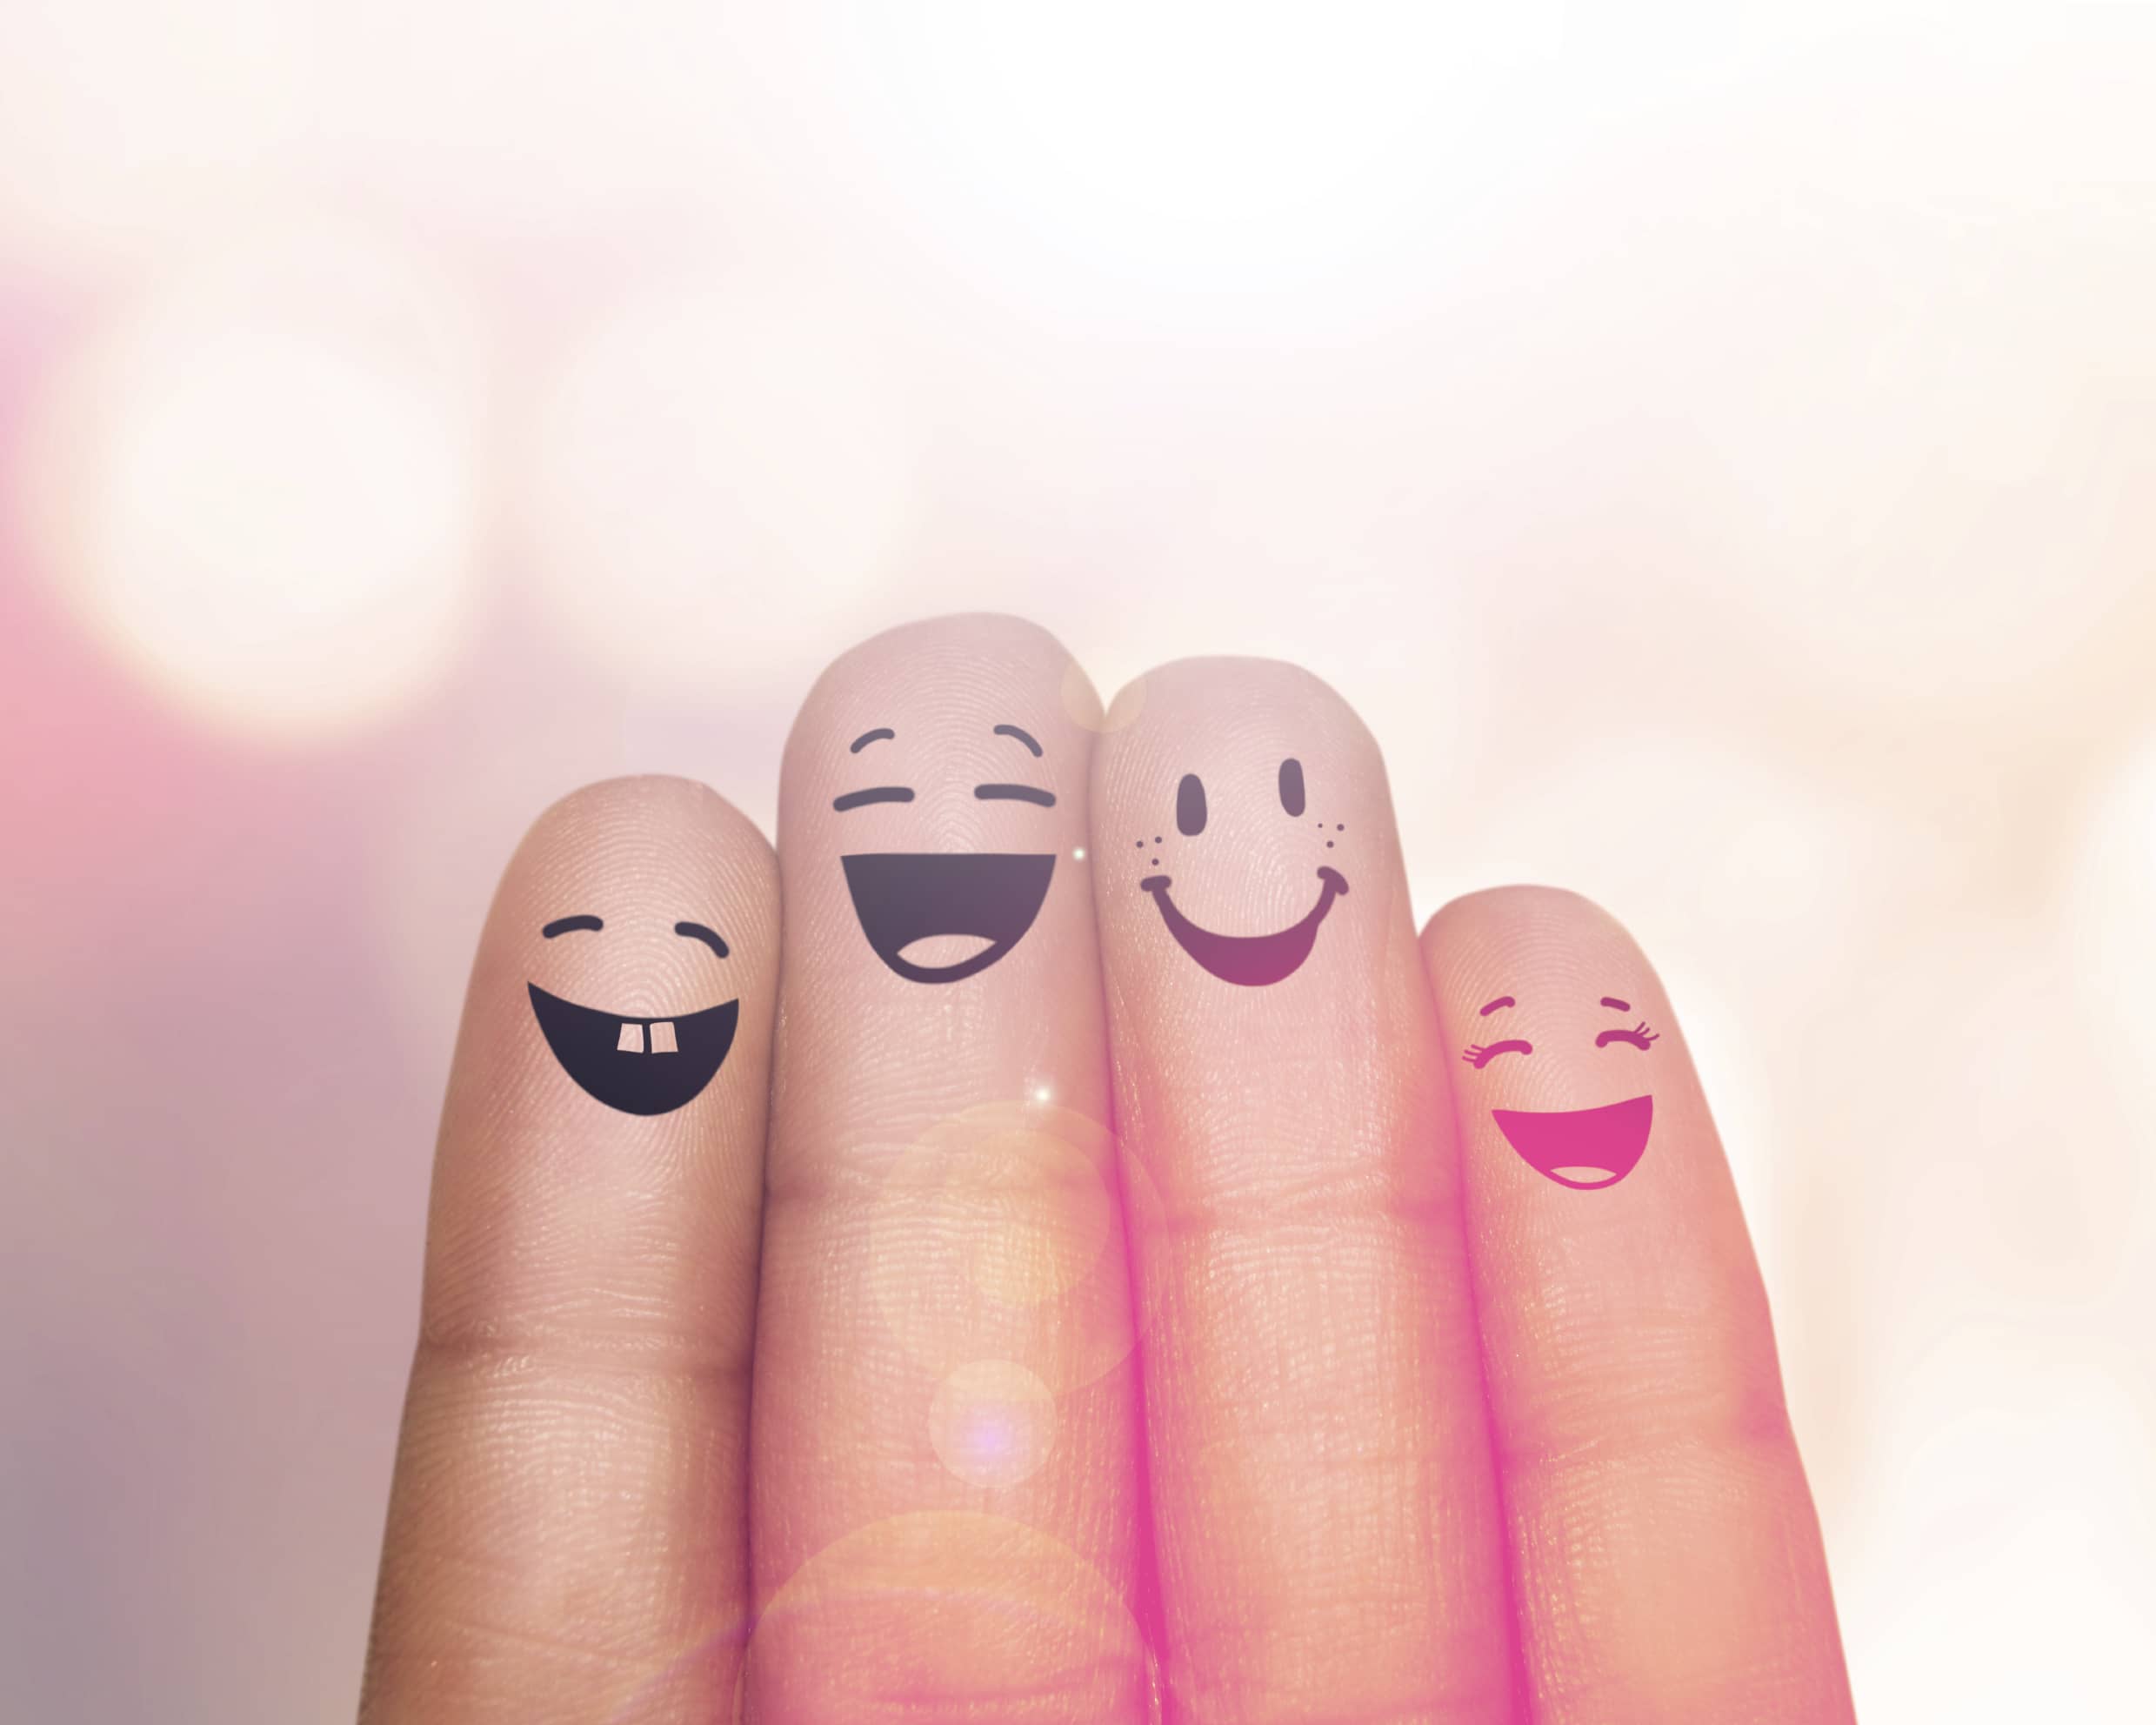 We're a happy family; fingers with smiling faces